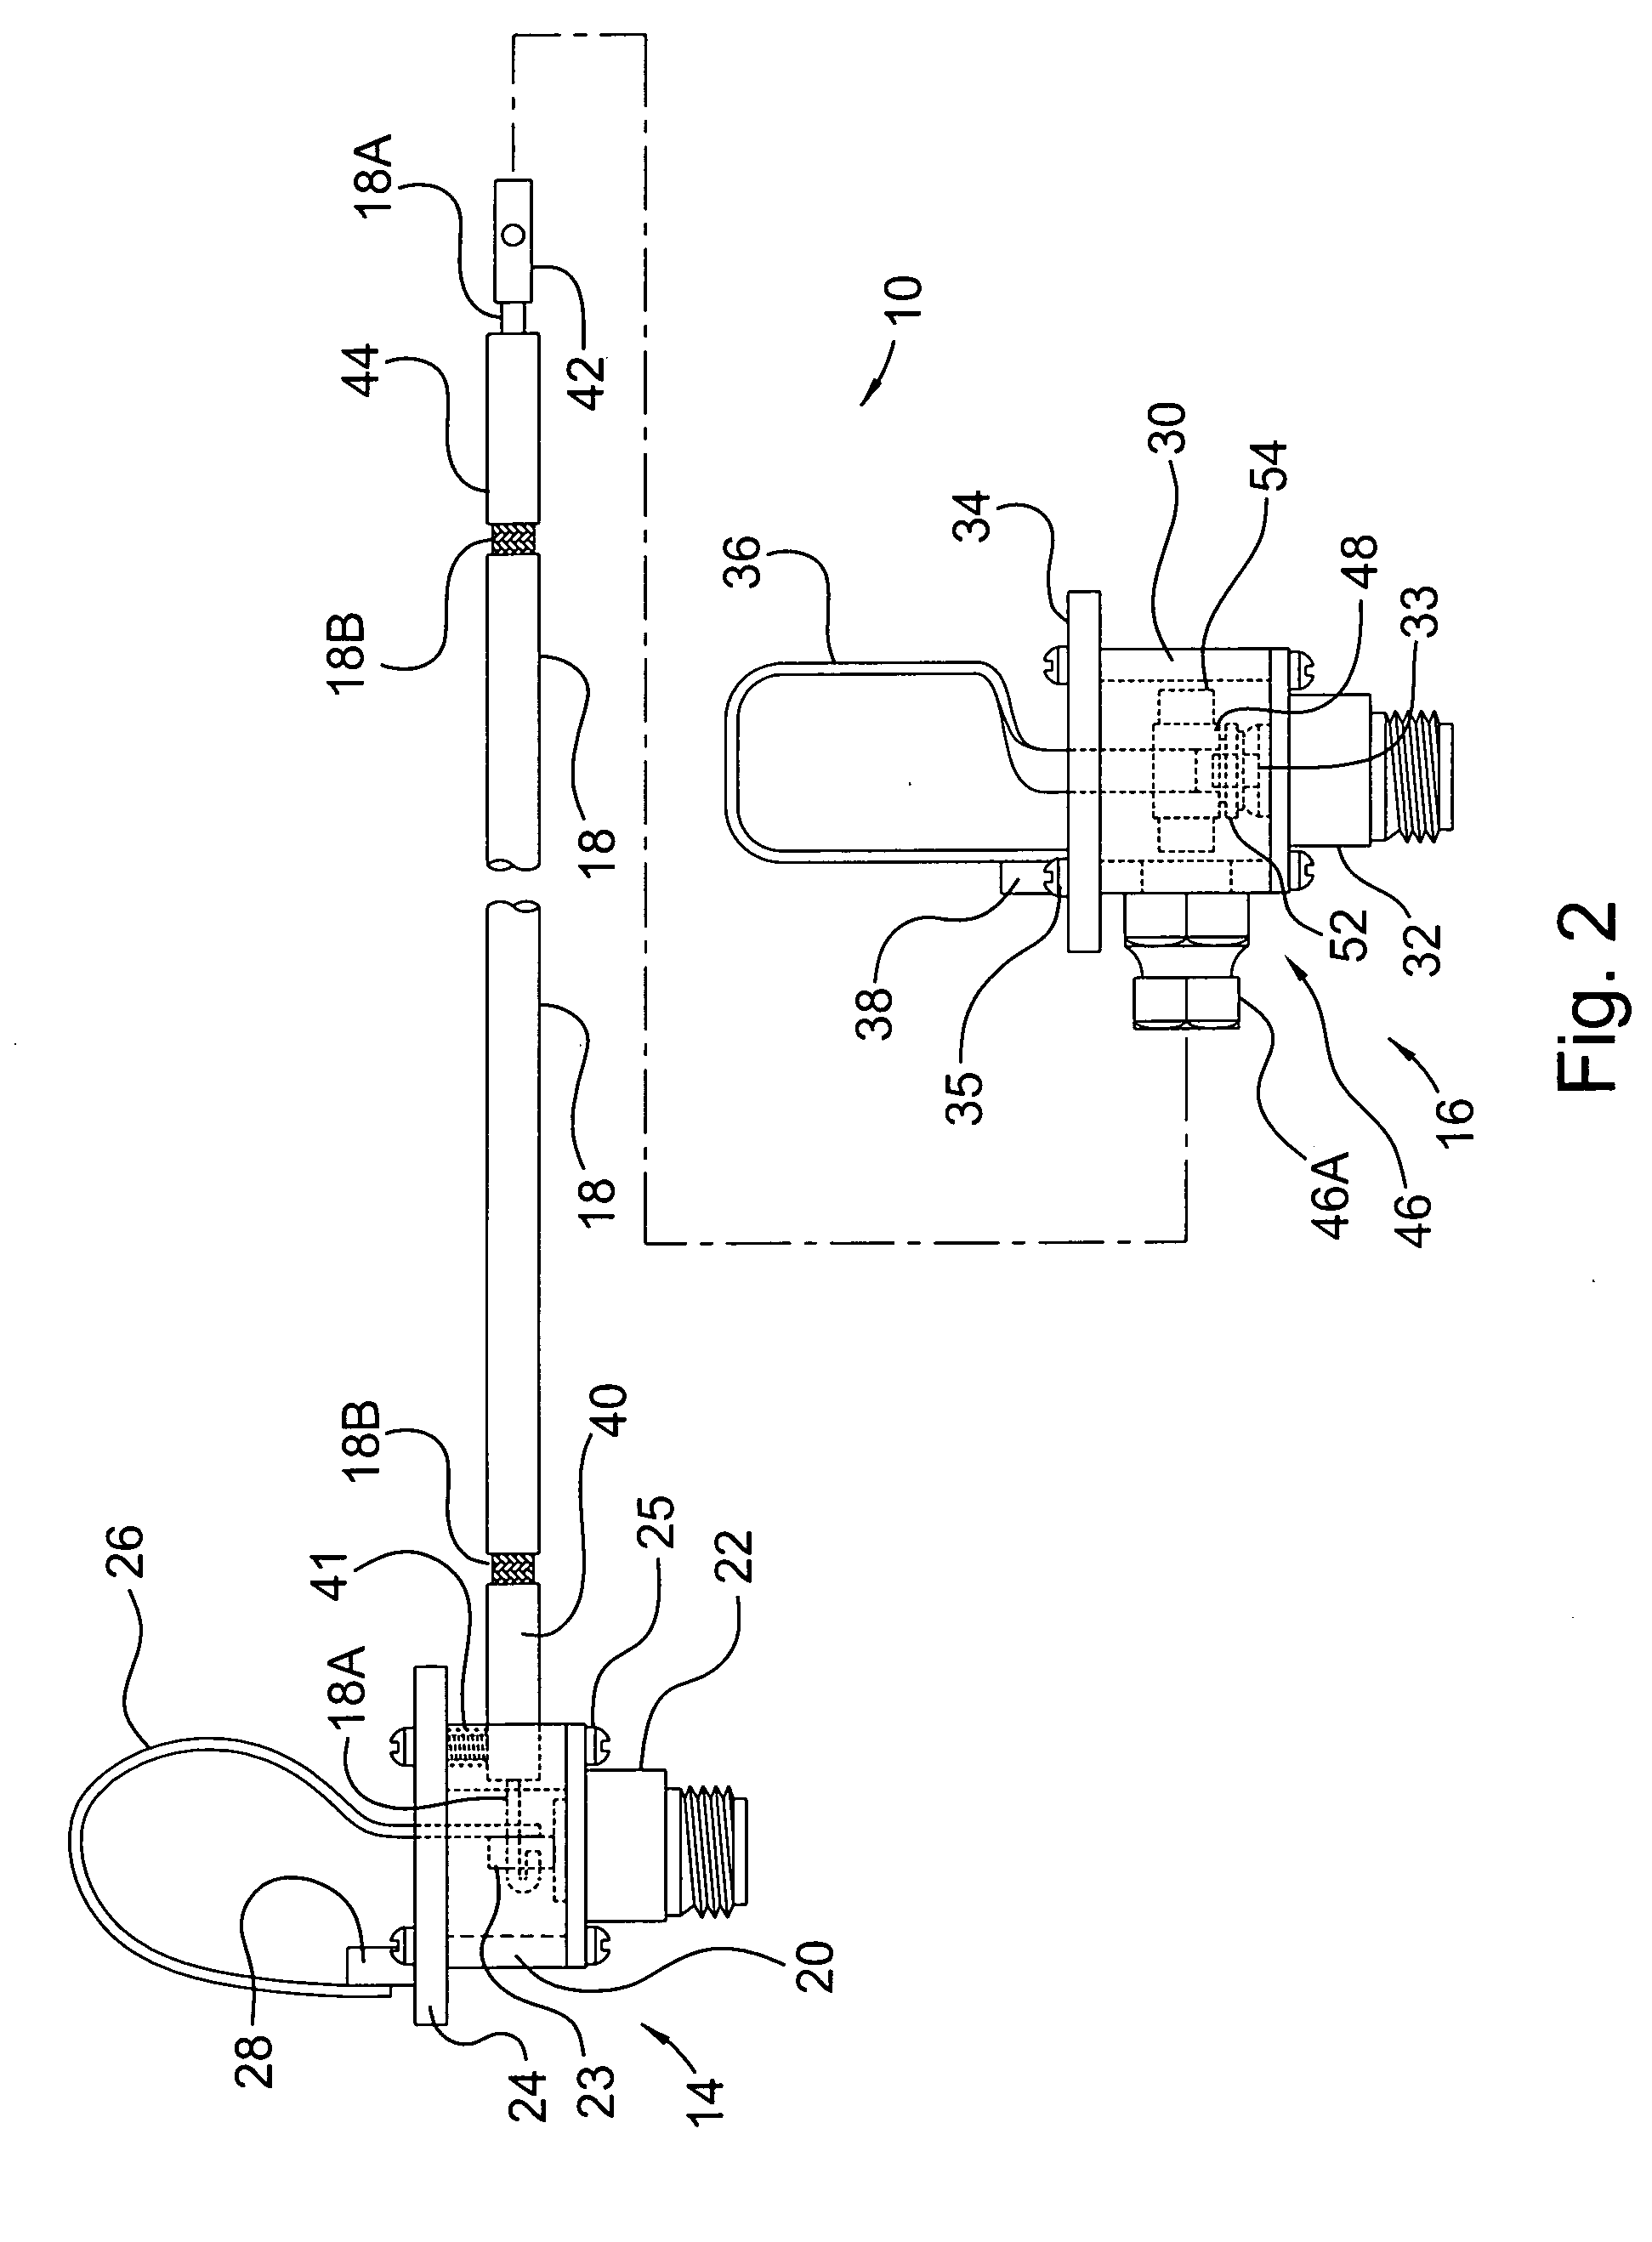 Band pass filter with tunable phase cancellation circuit